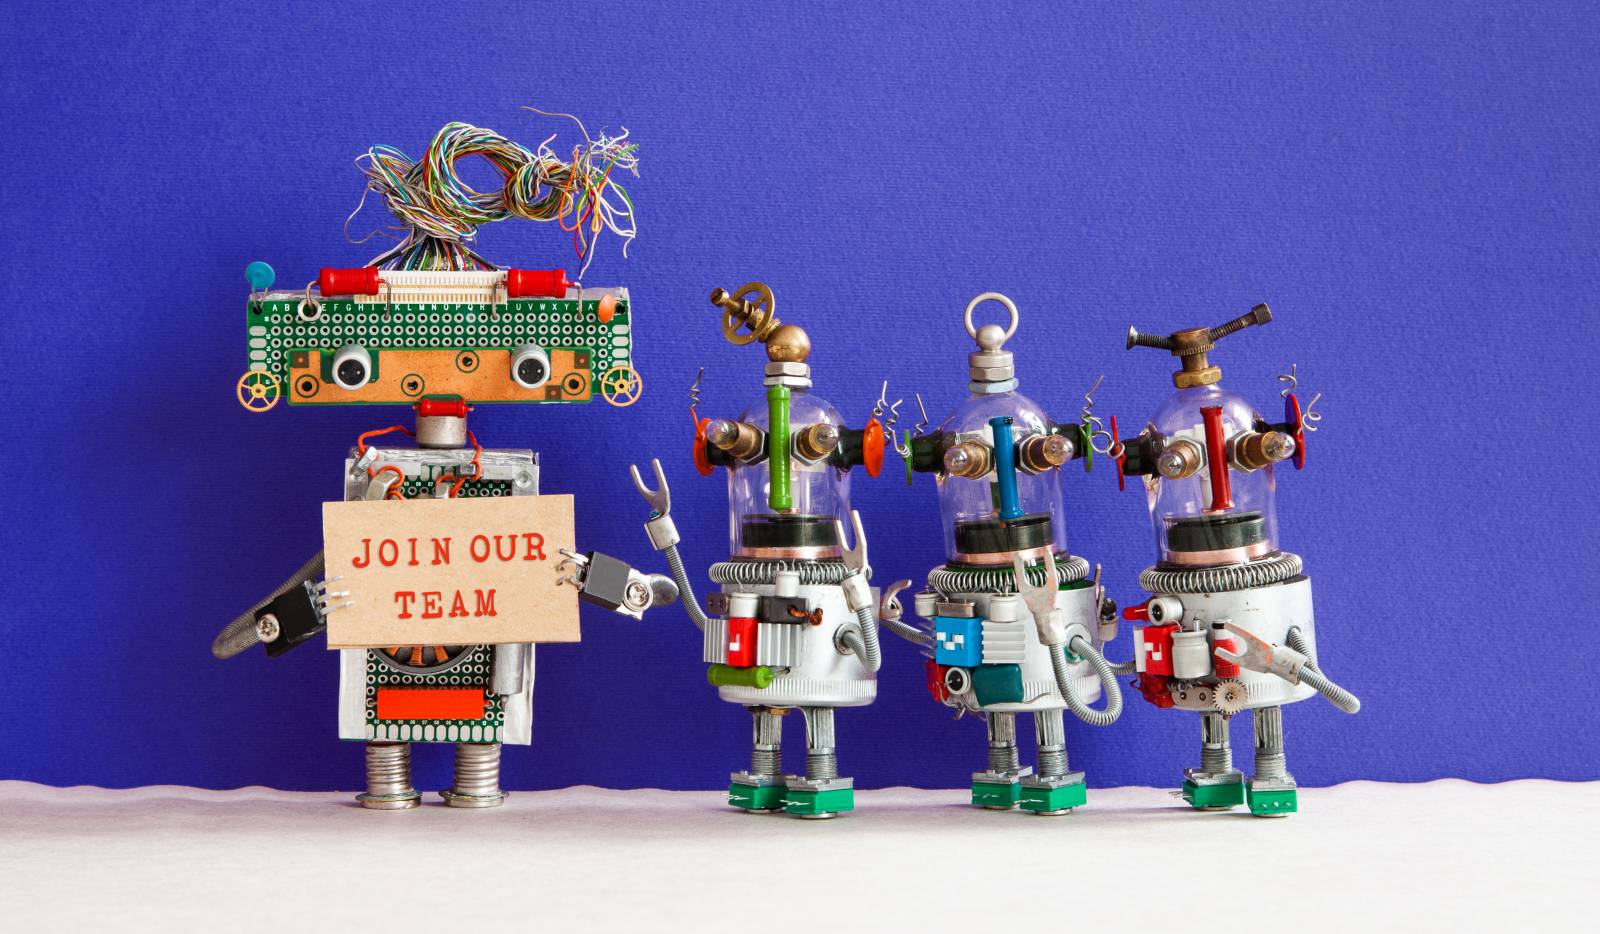 picture of funny robots holding a sign "join our team"